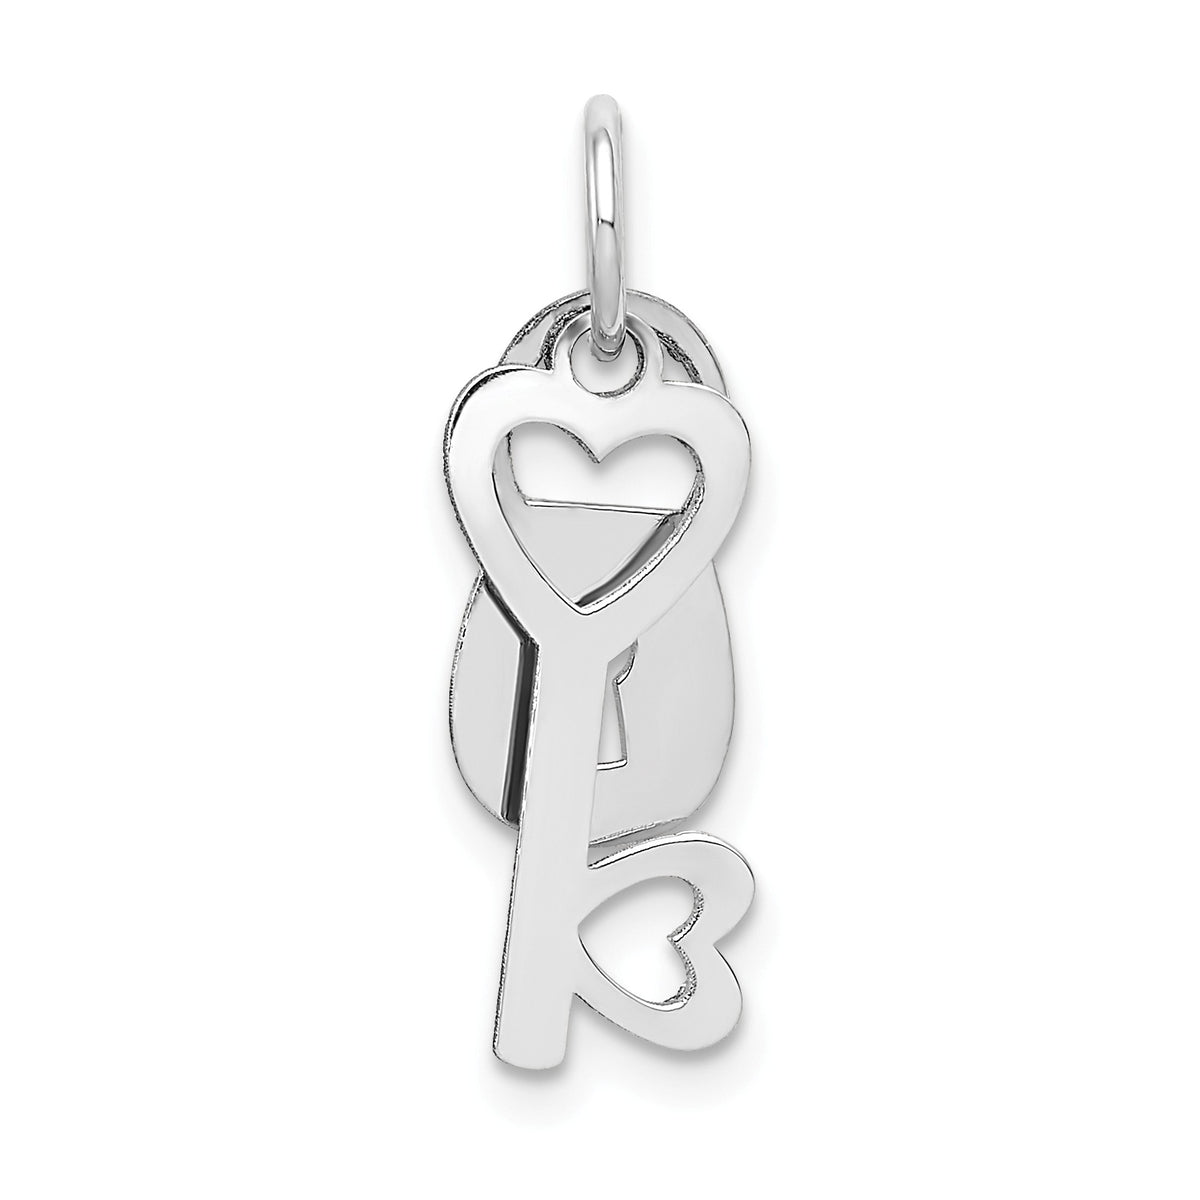 Alternate view of the 14k White Gold Polished Lock and Key Charm or Pendant, 7mm by The Black Bow Jewelry Co.